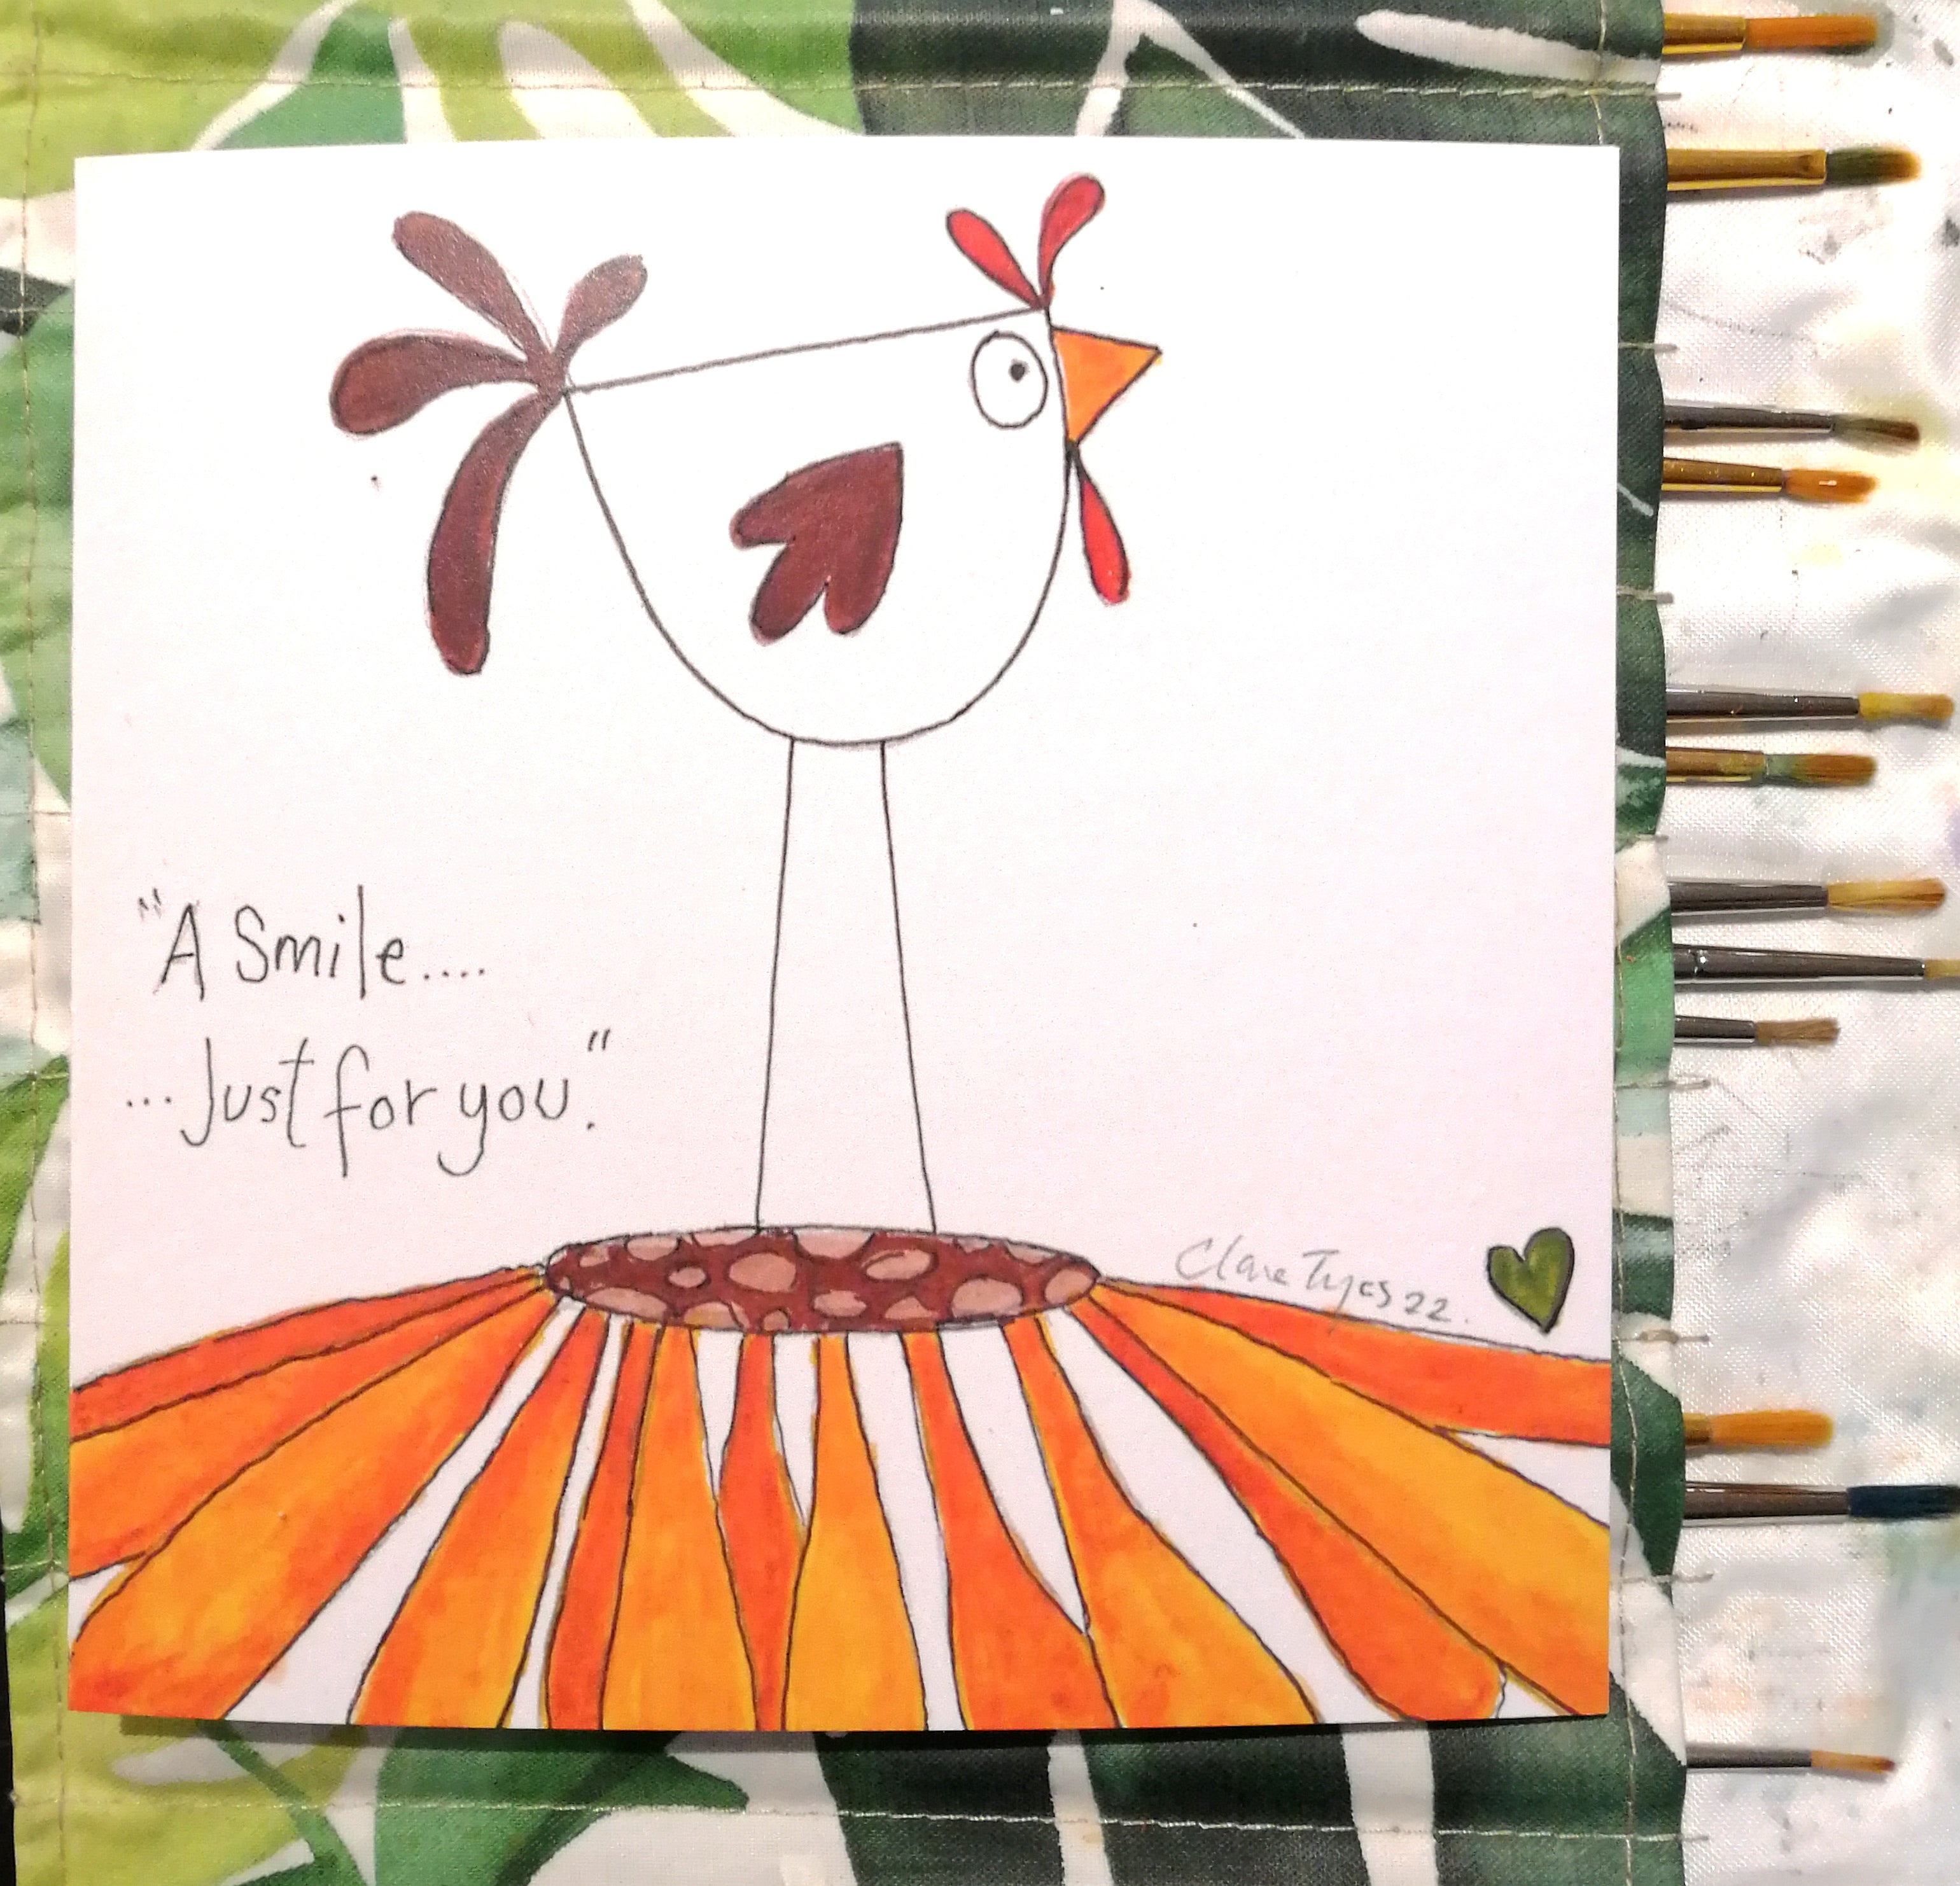 A smile just for you. Greetings card.